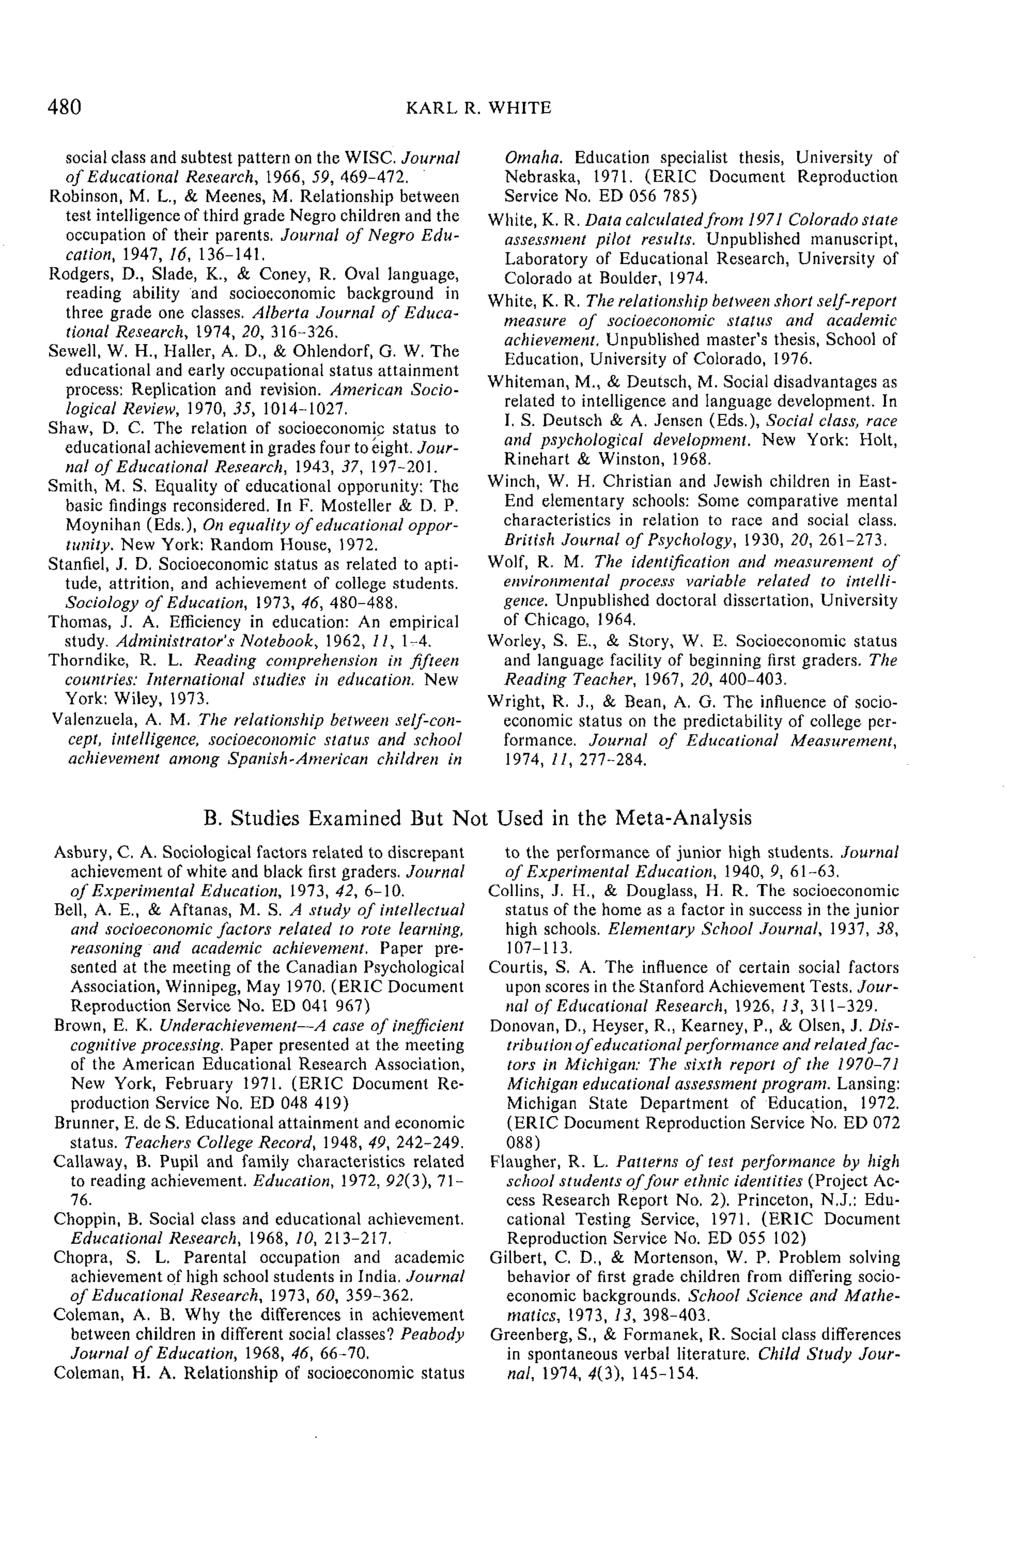 480 KARL R. WHITE social class and subtest pattern on the WISC. Journal of Educational Research, 1966, 59, 469-472. Robinson, M. L., & Meenes, M.